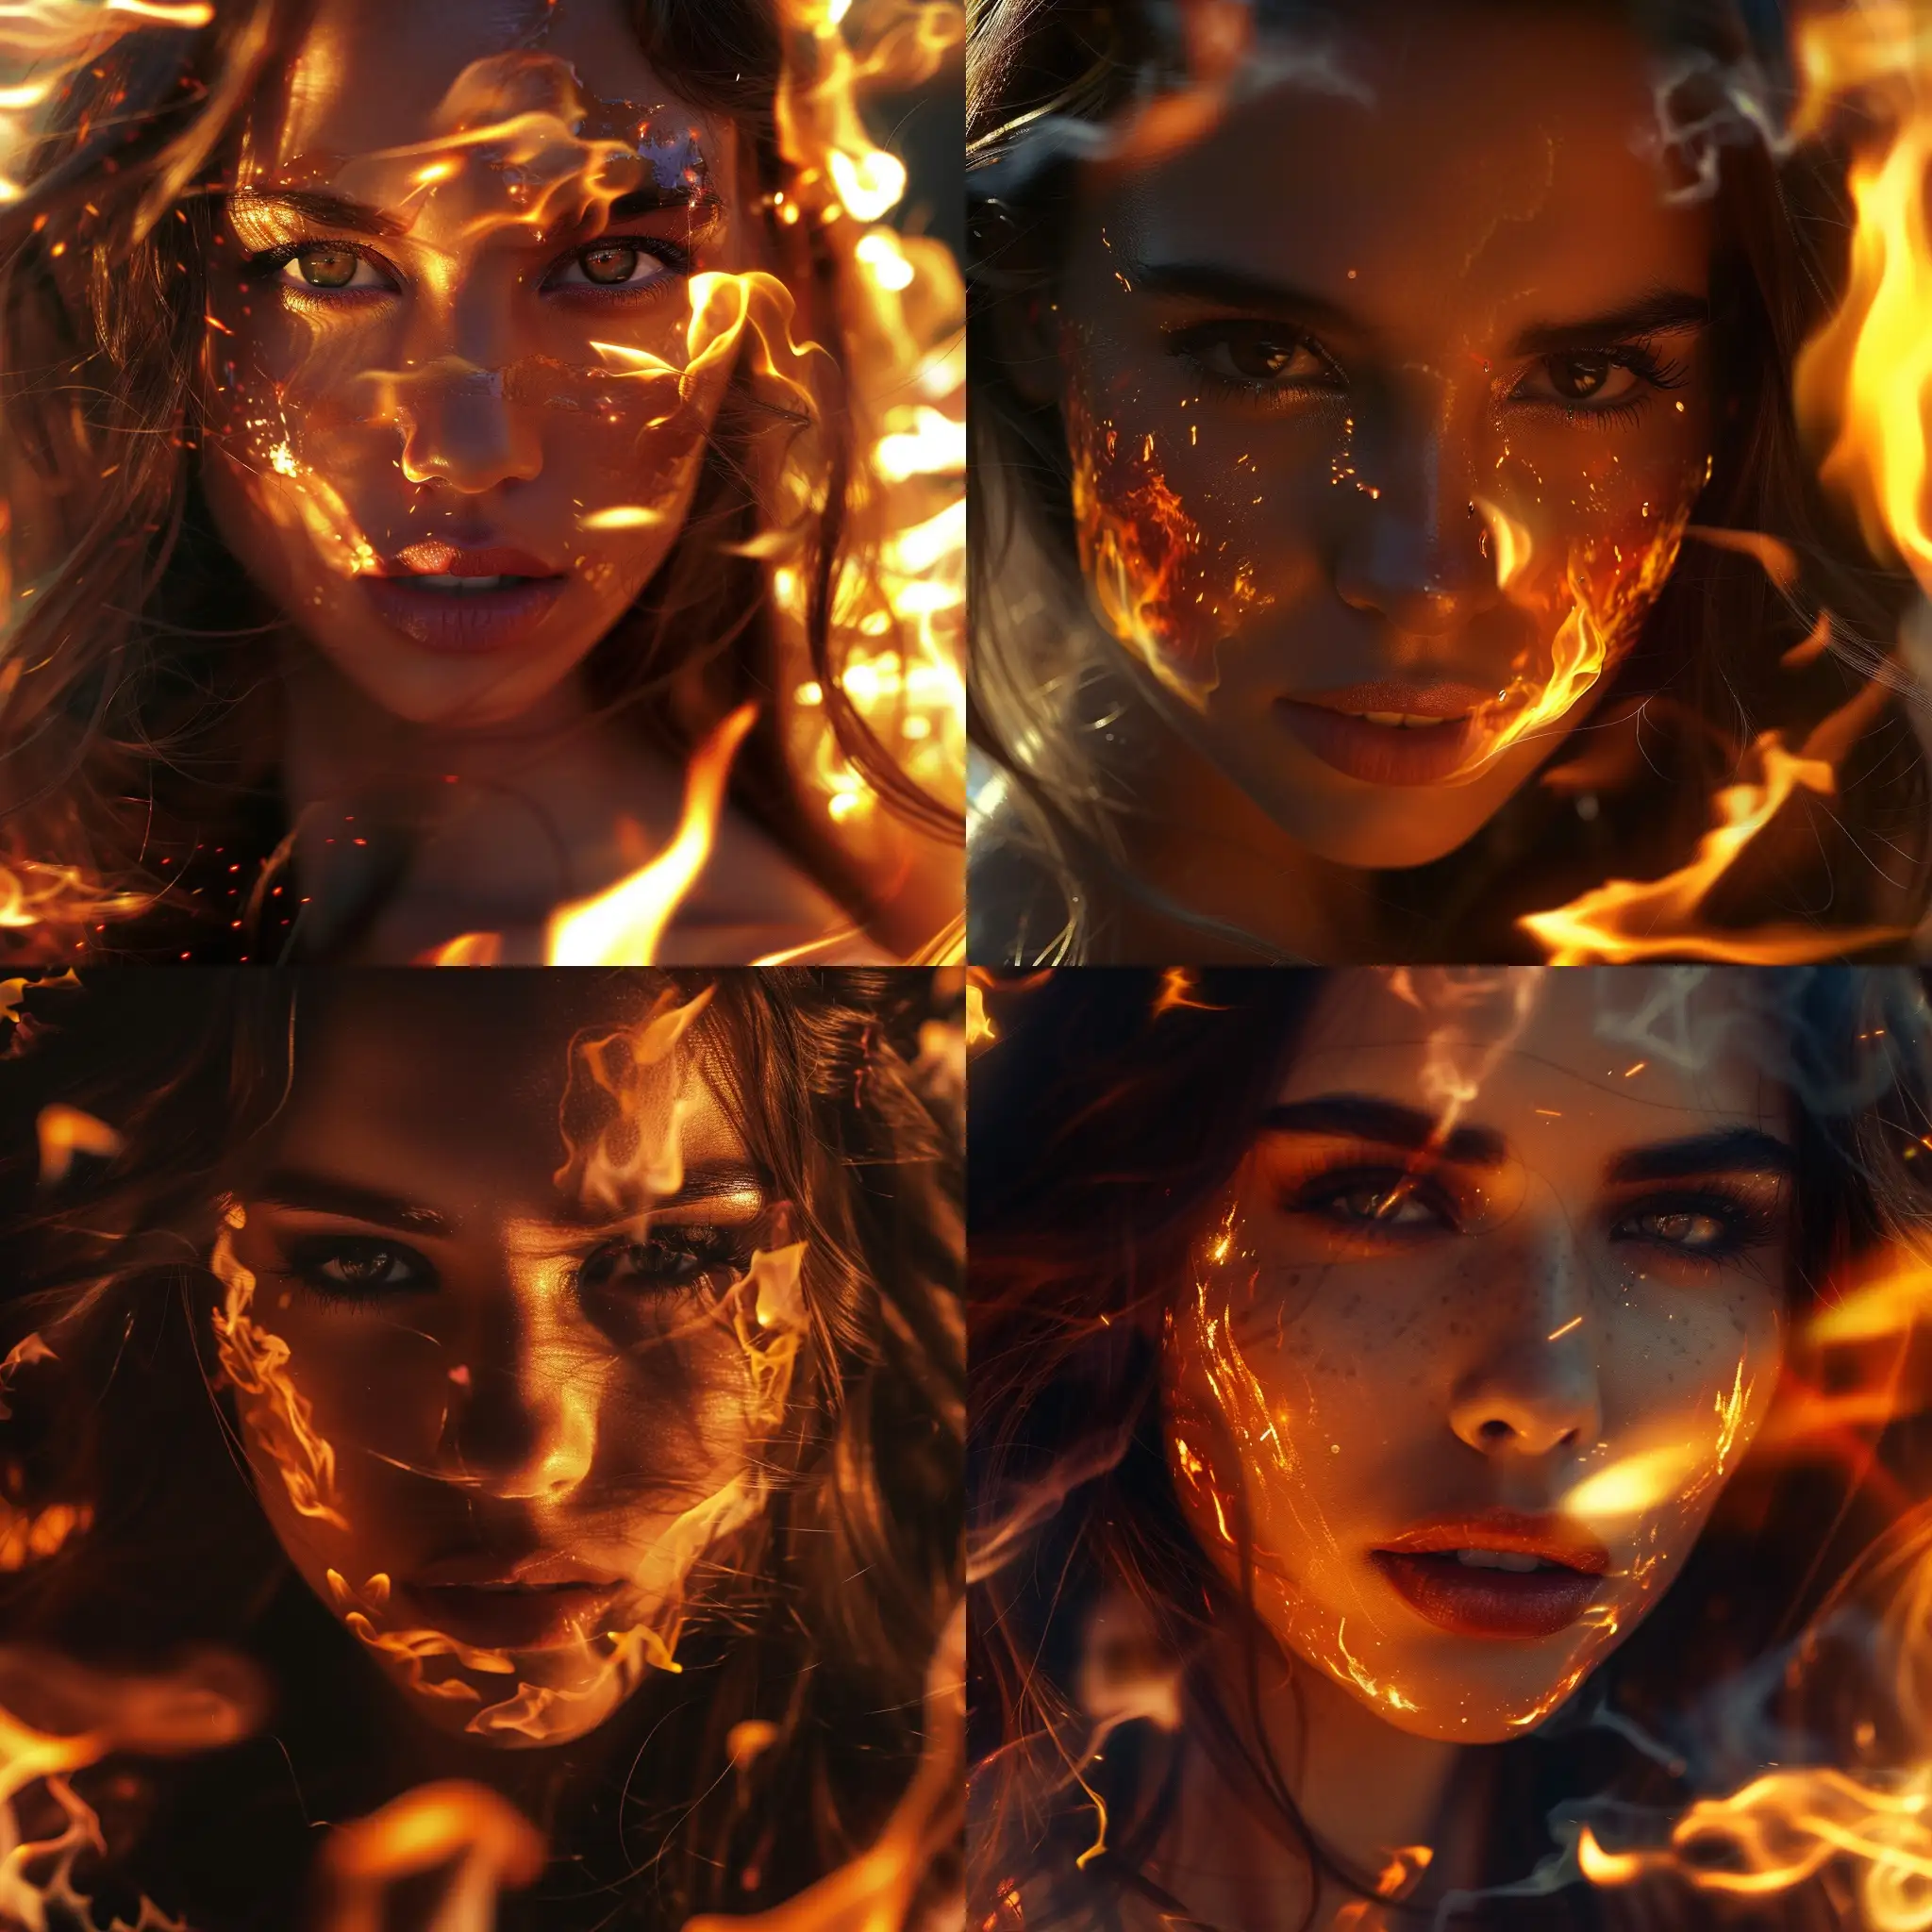 A close up image of a beautiful woman with flames around her face. Stark, surreal, beautiful, disturbing, arresting 